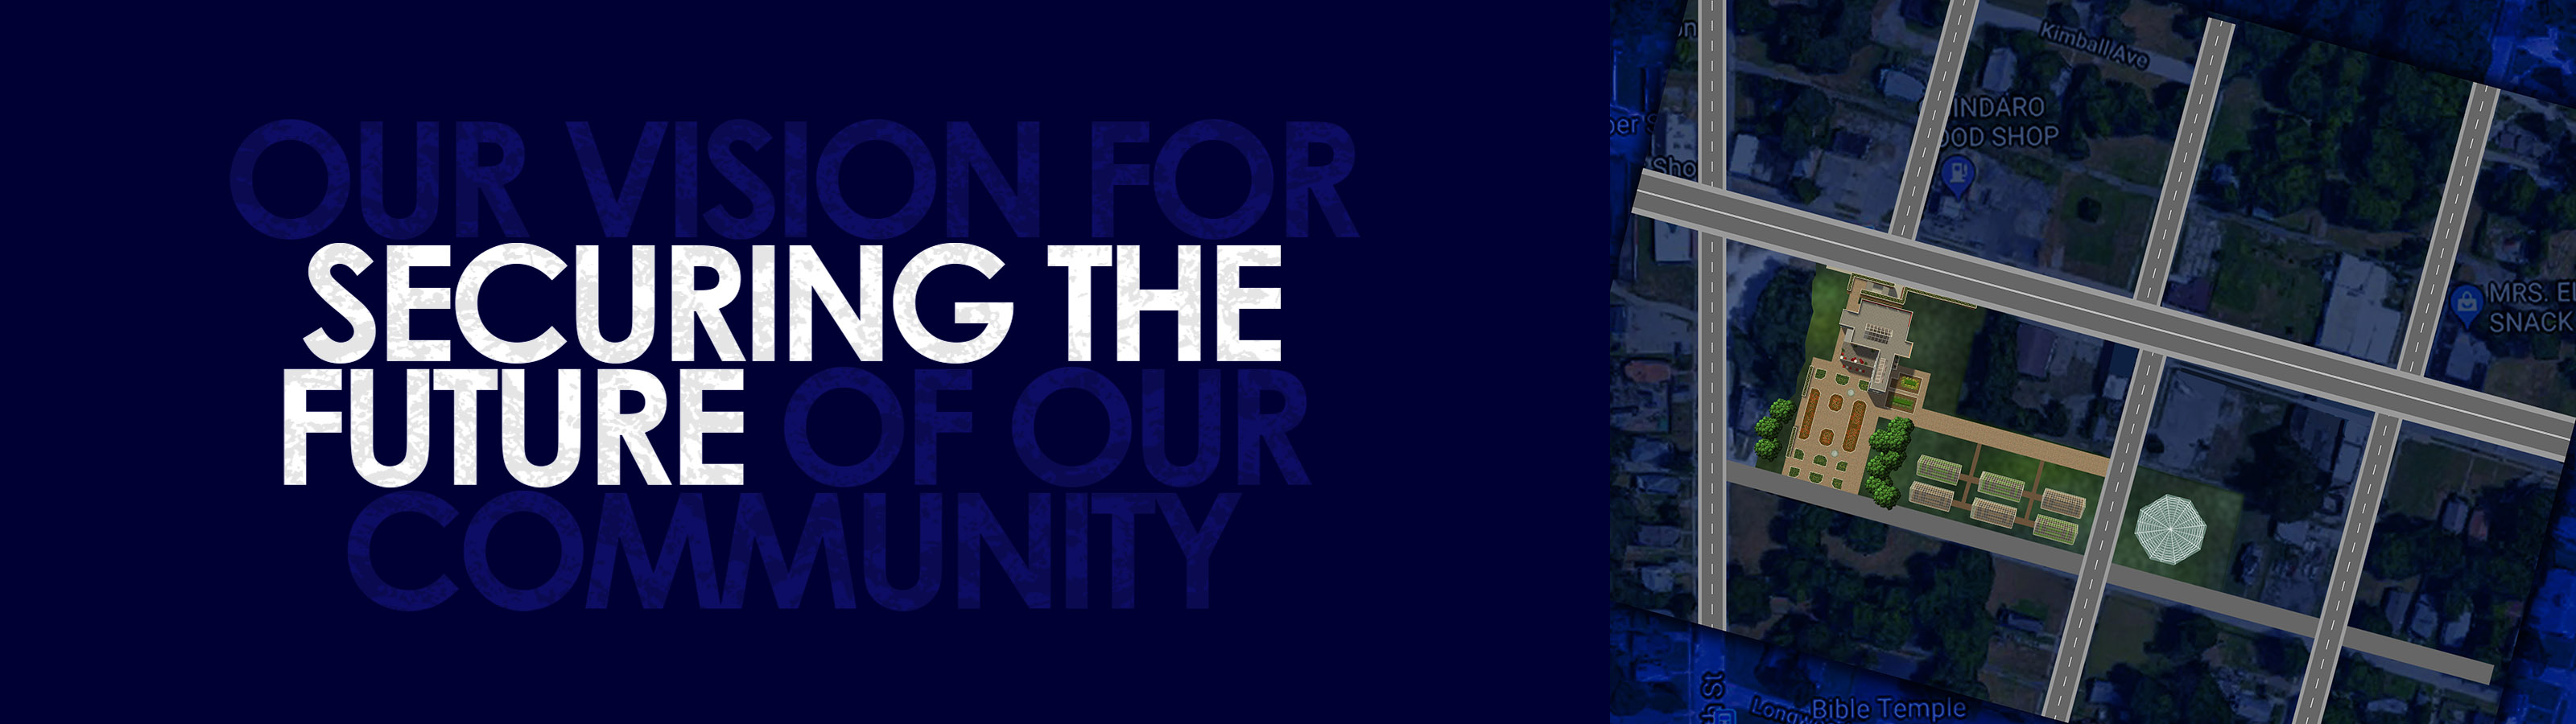 Our Vision for Securing The Future of Our Community